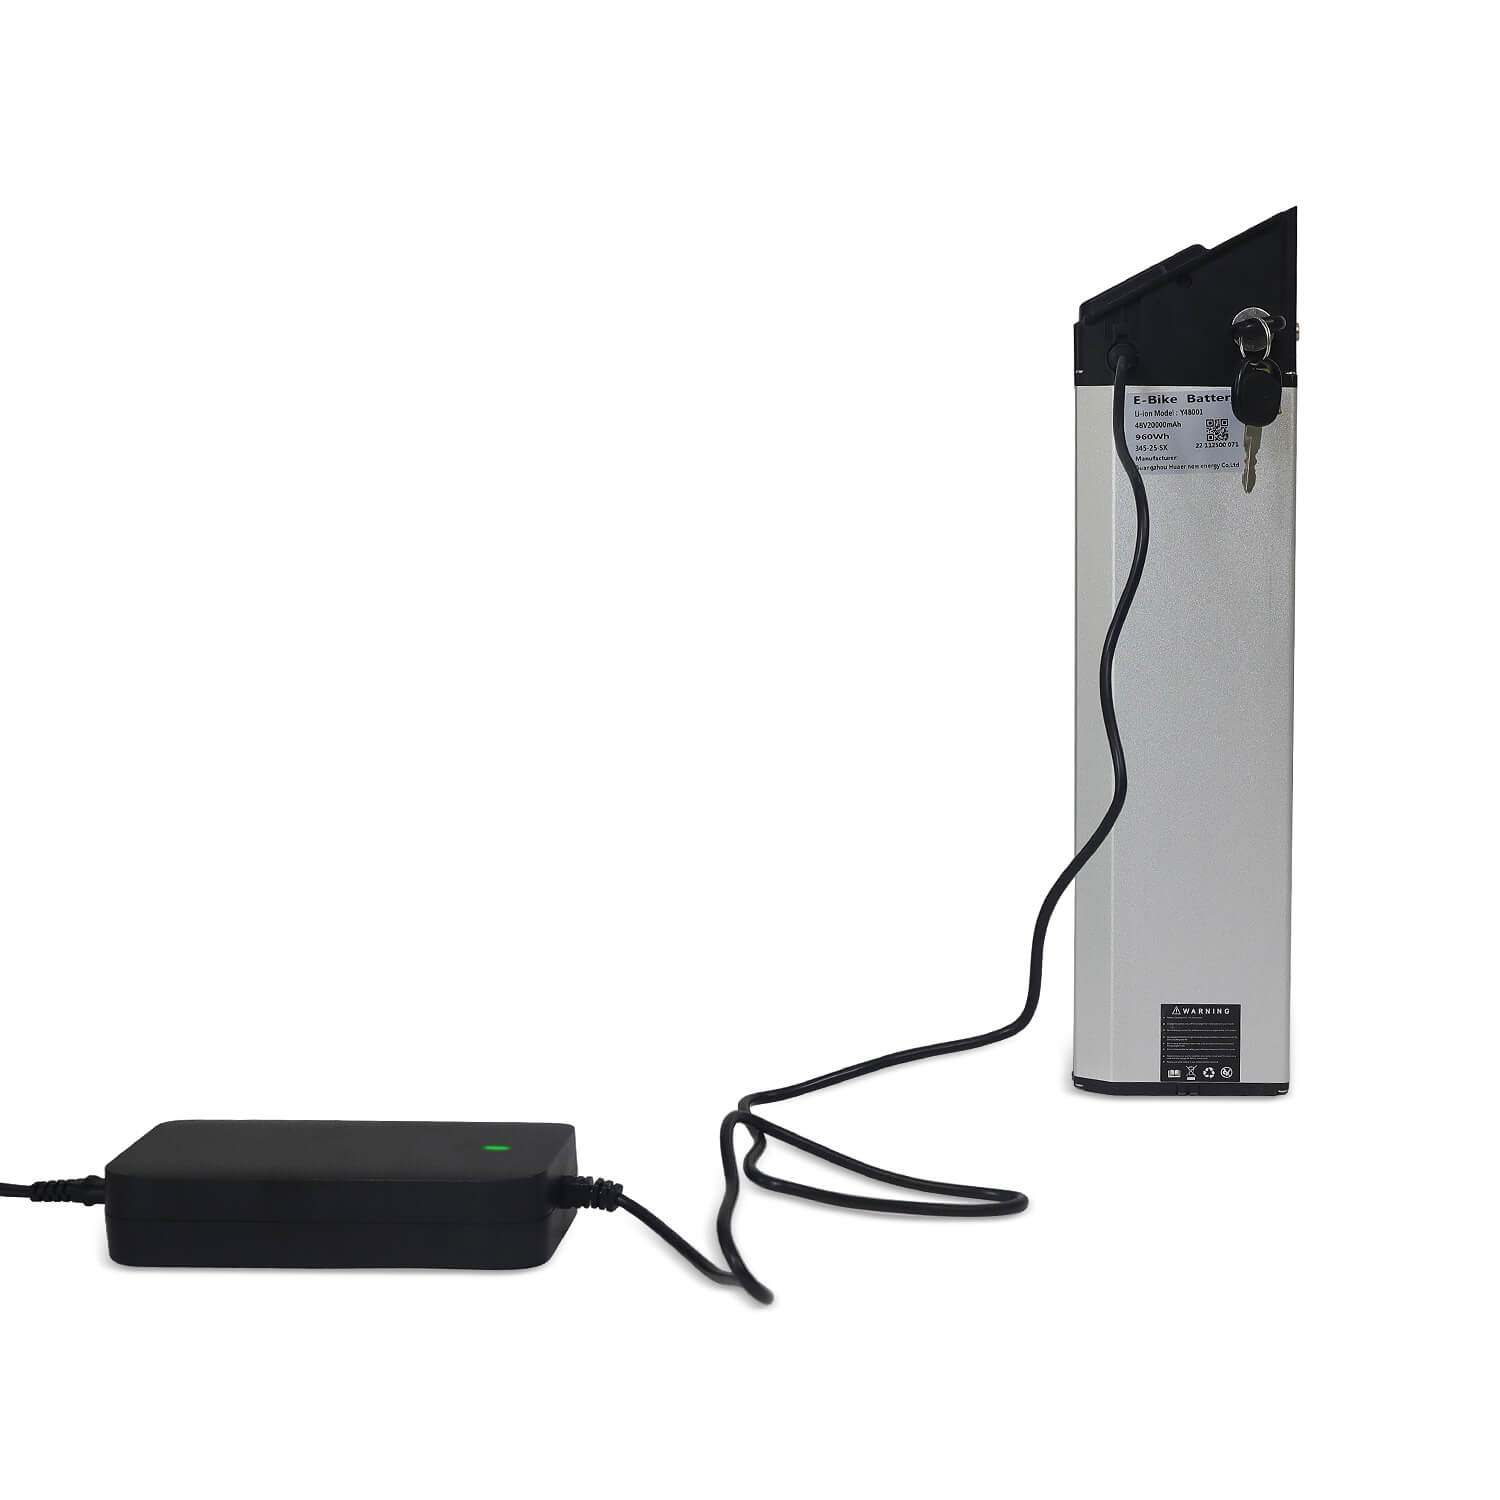 3A fast charger, full charge in 5-6 hours - Li-ion battery 48V, 20Ah (960 Wh) lasts 80 miles